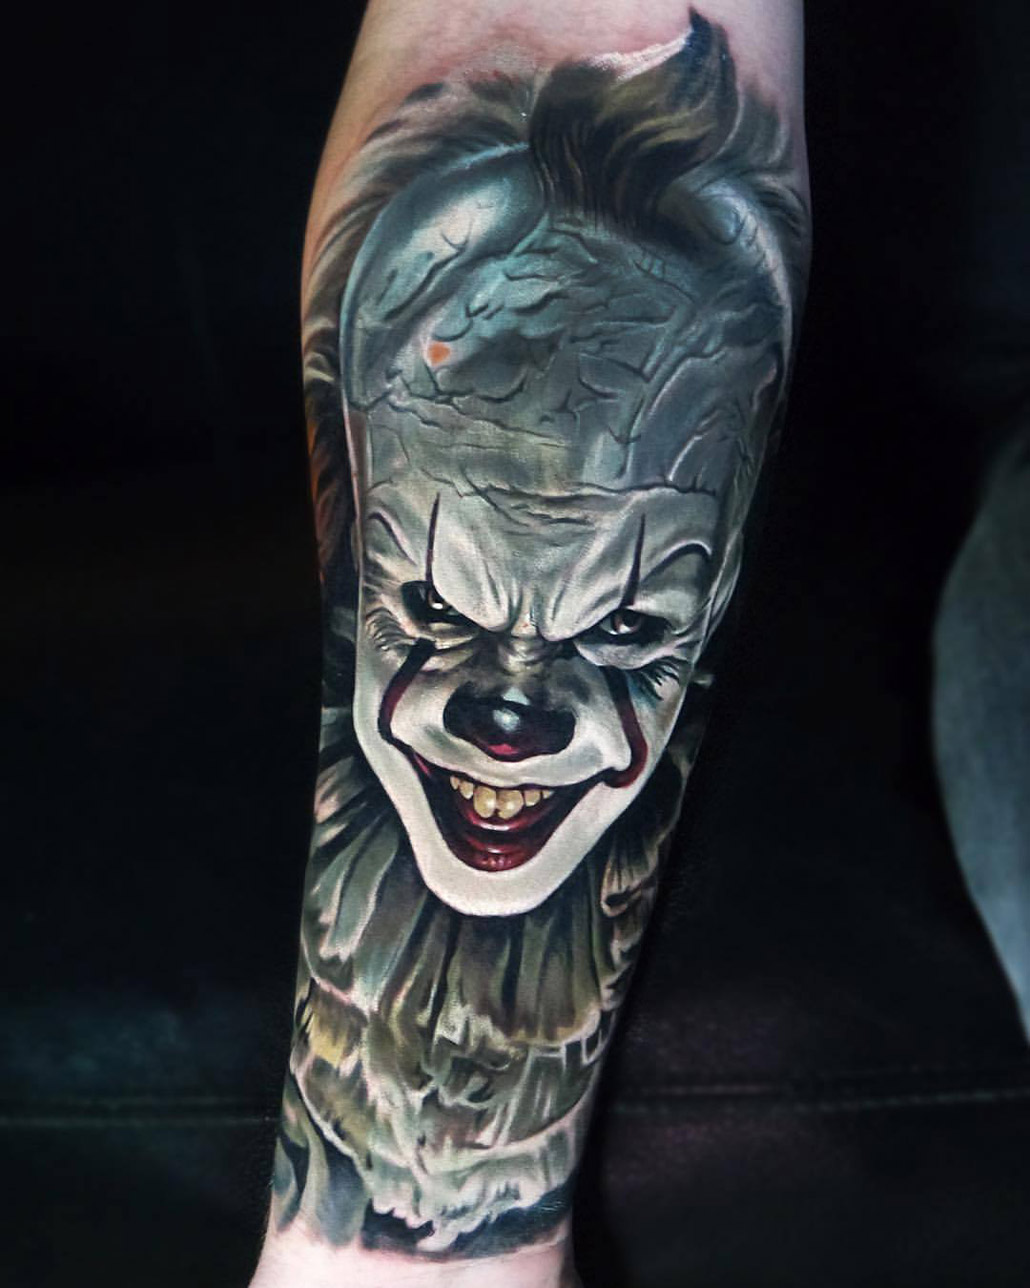 IT tattoo with Pennywise